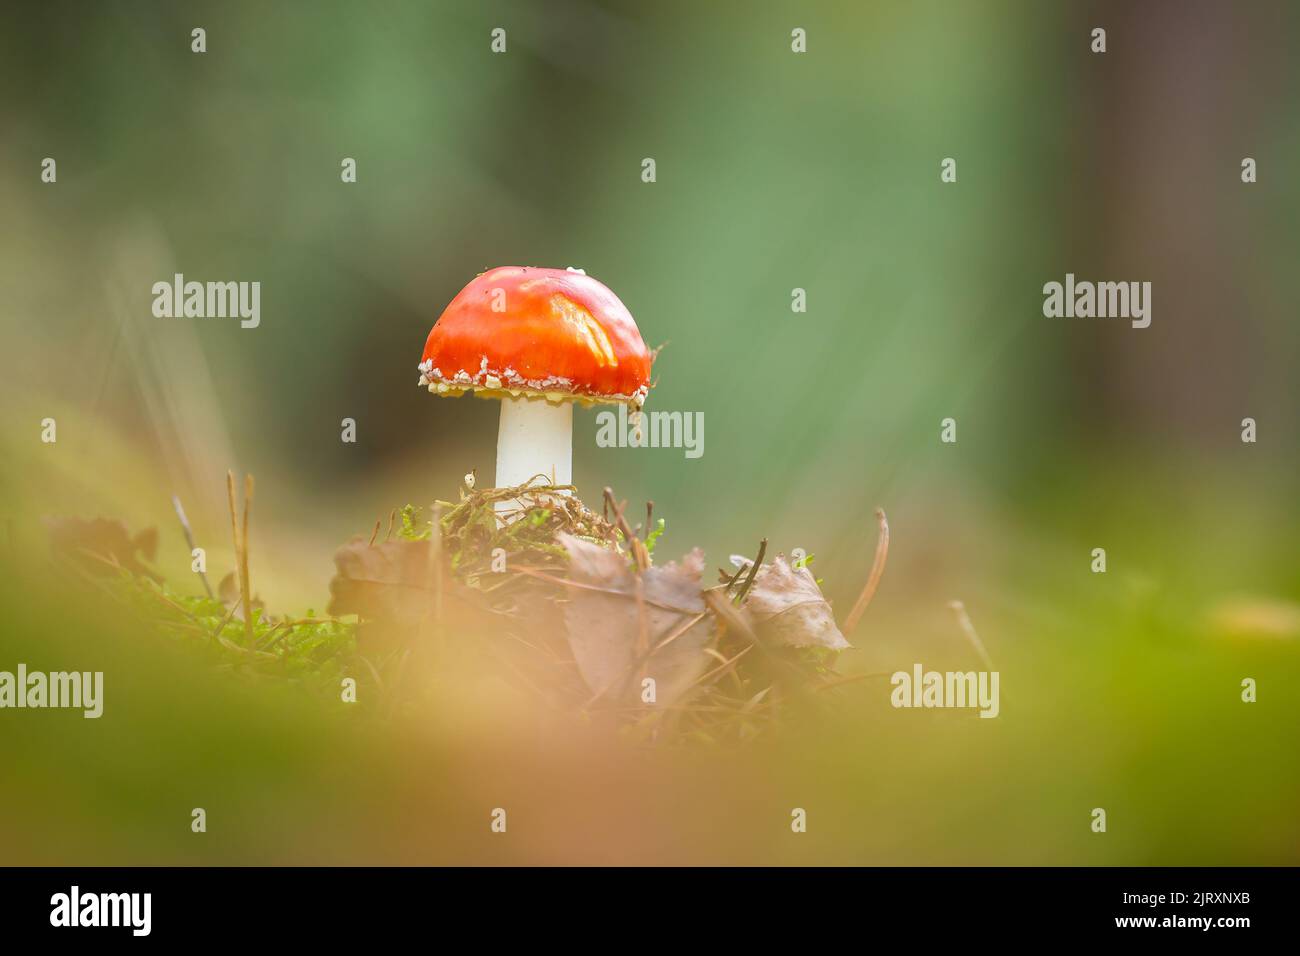 amanita muscaria, fly agaric or fly amanita basidiomycota muscimol mushroom with typical white spots on a red hat in a forest. Natural light, vibrant Stock Photo